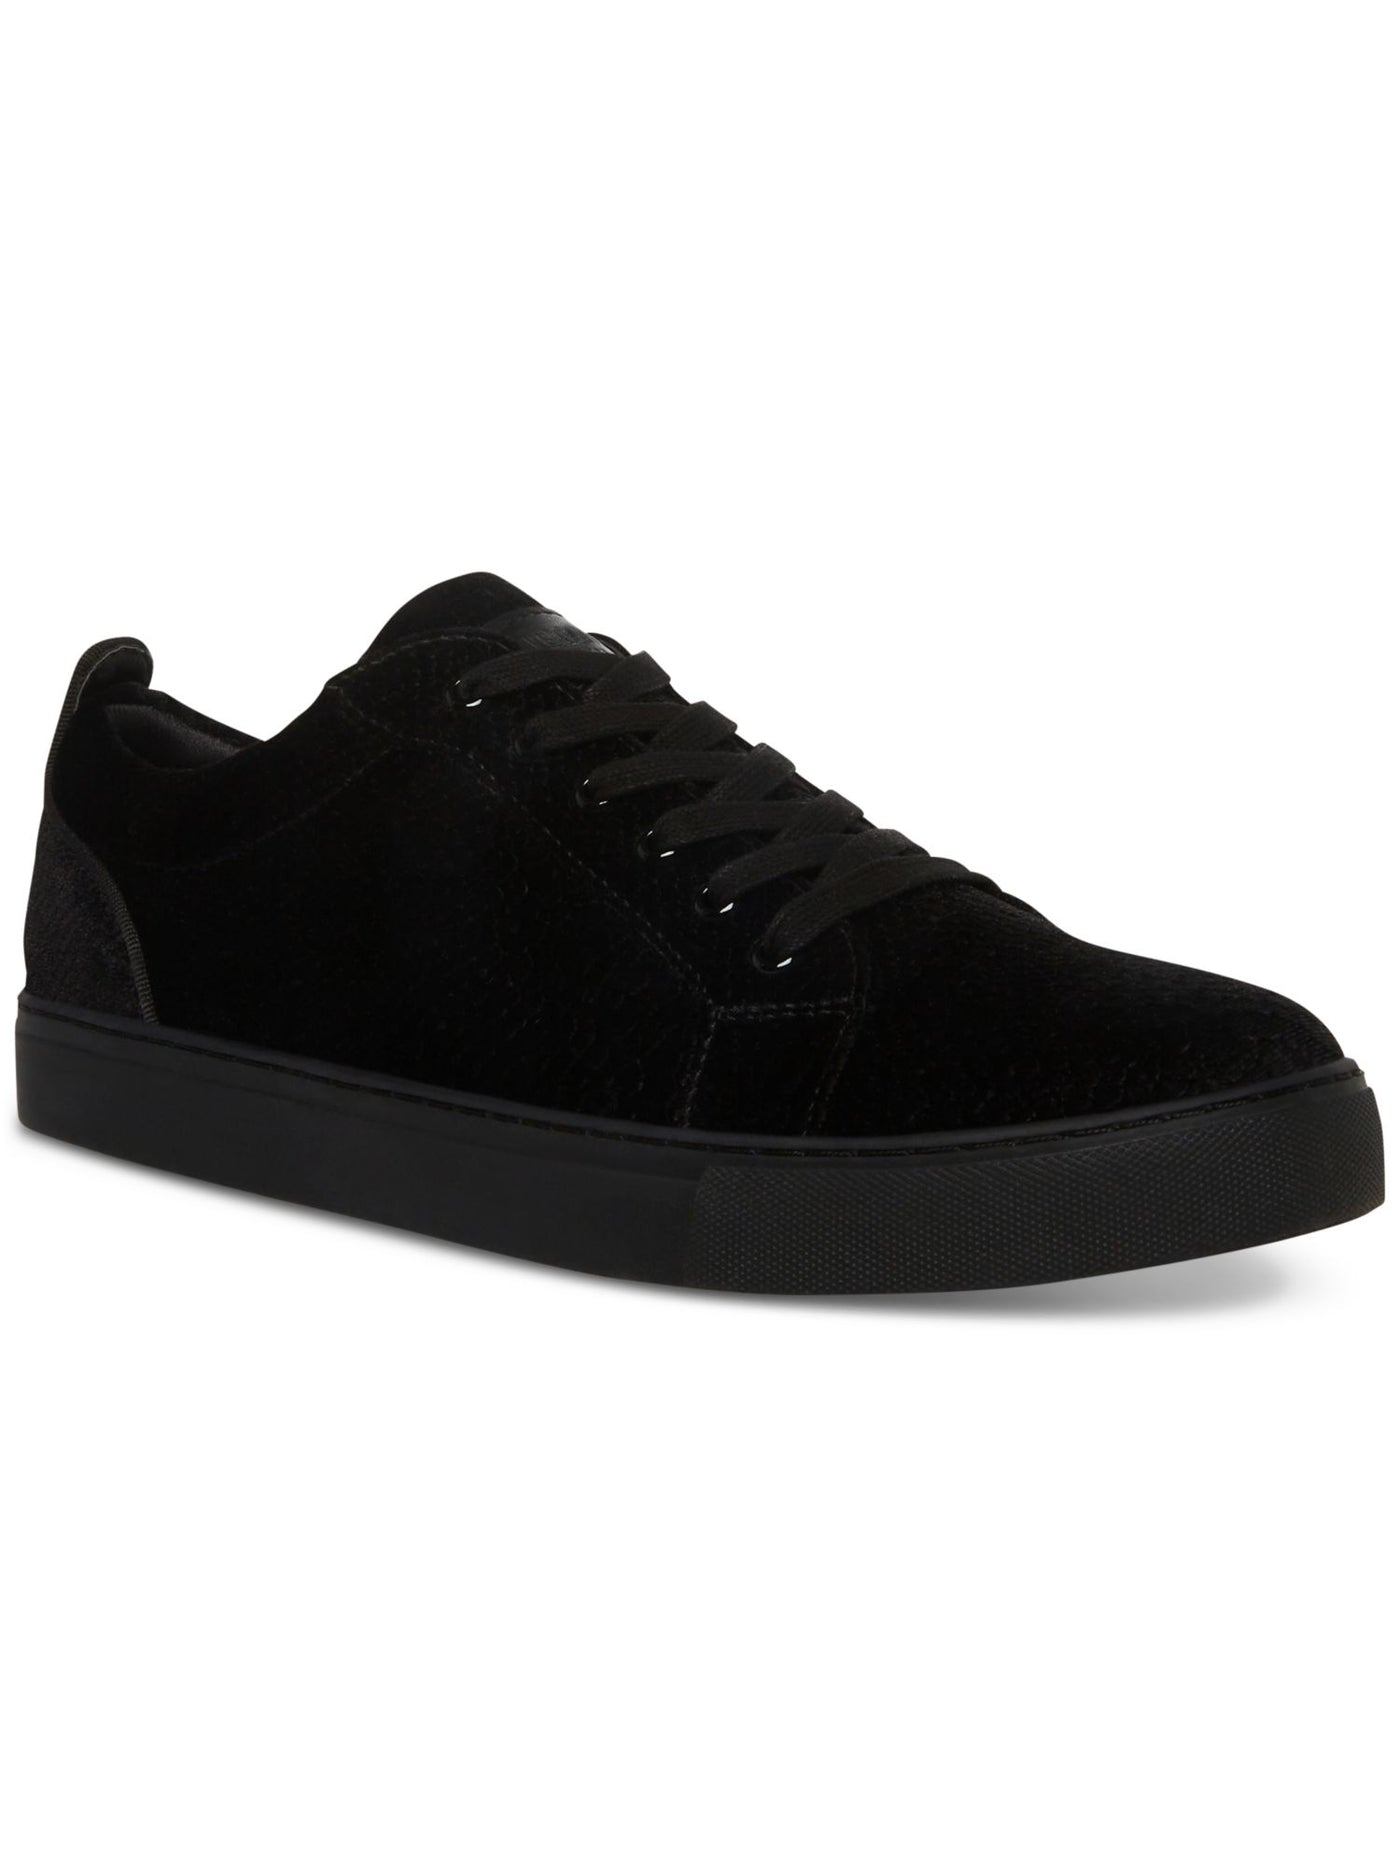 STEVE MADDEN Mens Black Snake Embossed Back Tab Yali Round Toe Lace-Up Suede Sneakers Shoes 12 M